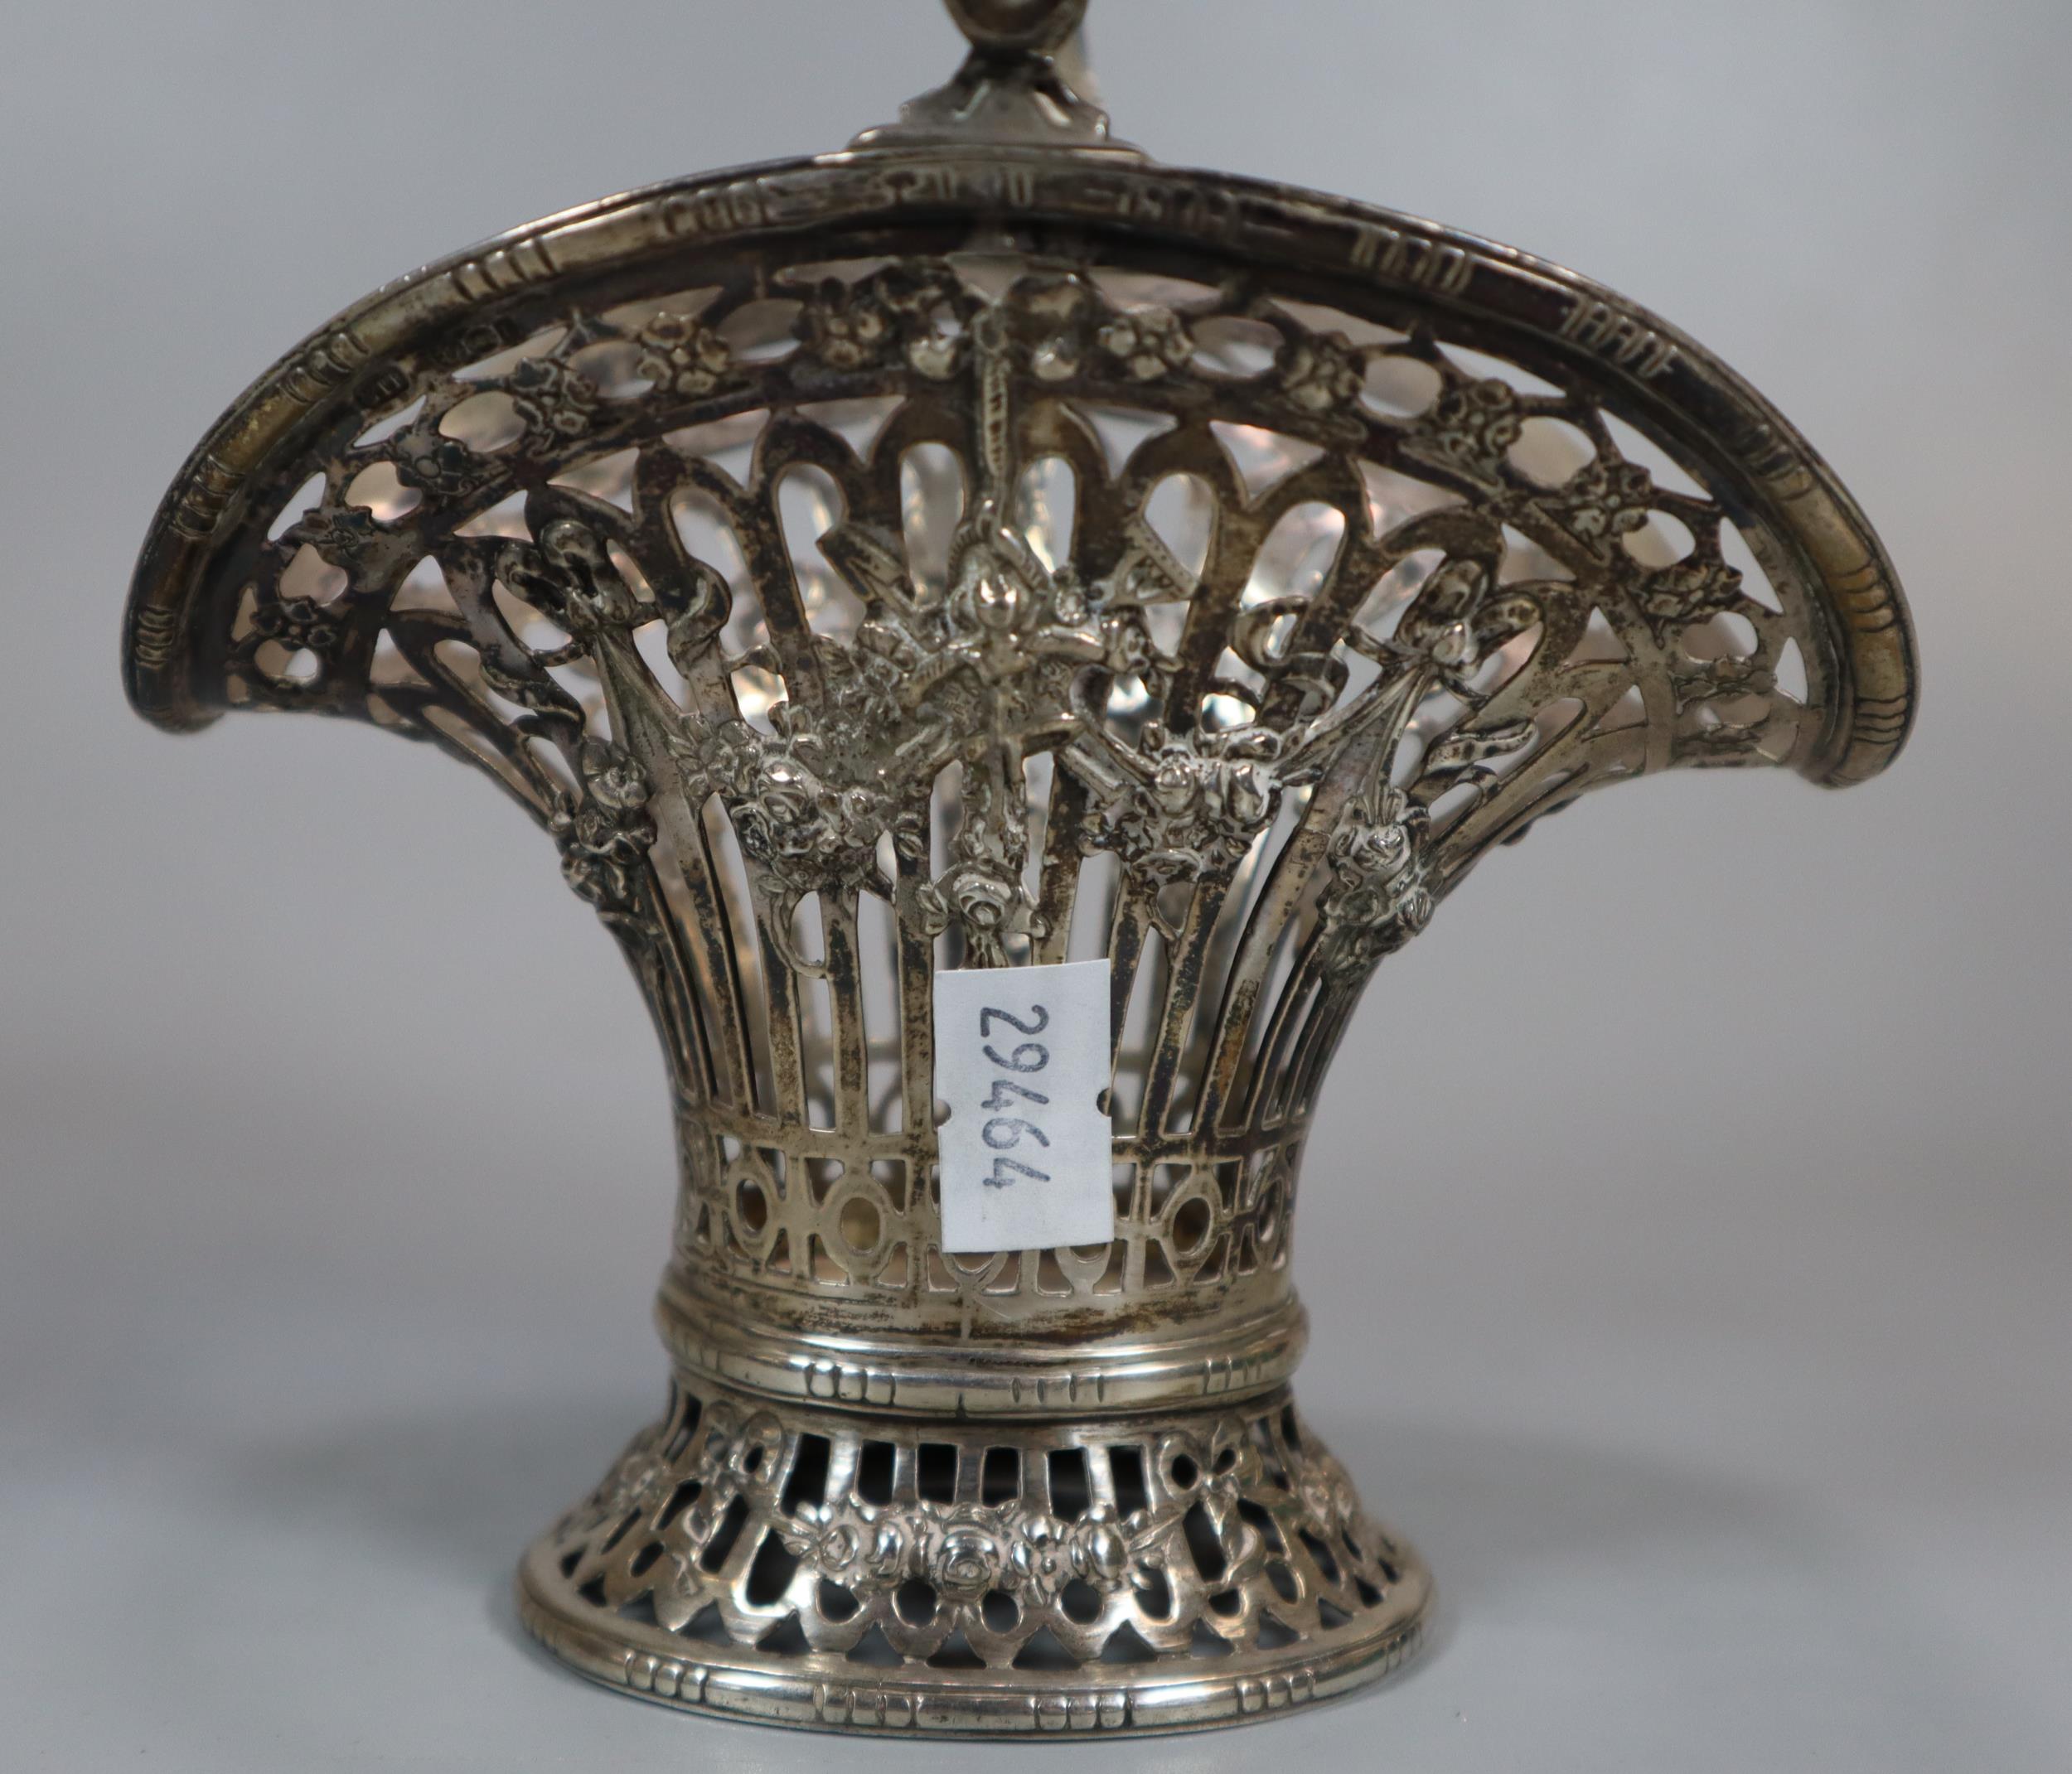 Continental silver pierced ornate basket with swing handle marked 930. 5 troy oz approx. (B.P. 21% + - Image 4 of 5